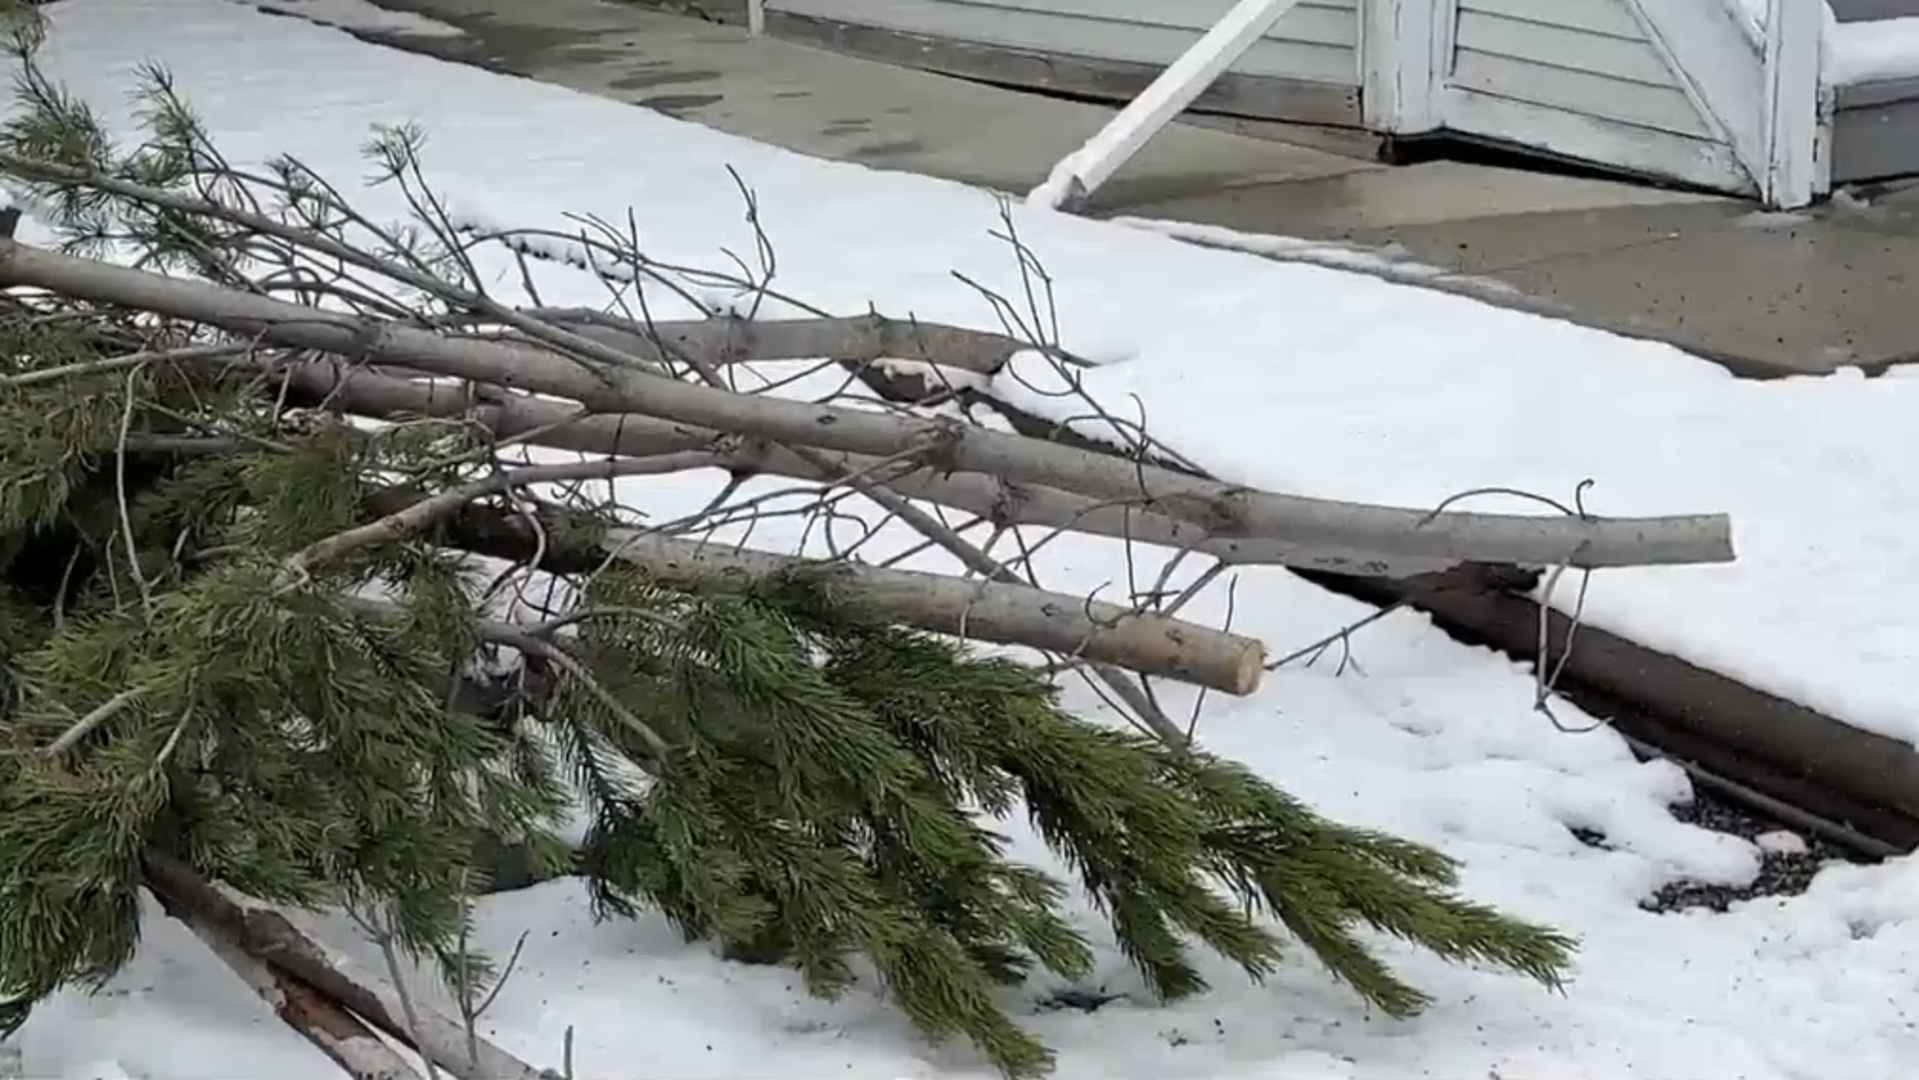 Spring snow brings fallen trees, clogged storm drains and power outages to Calgary